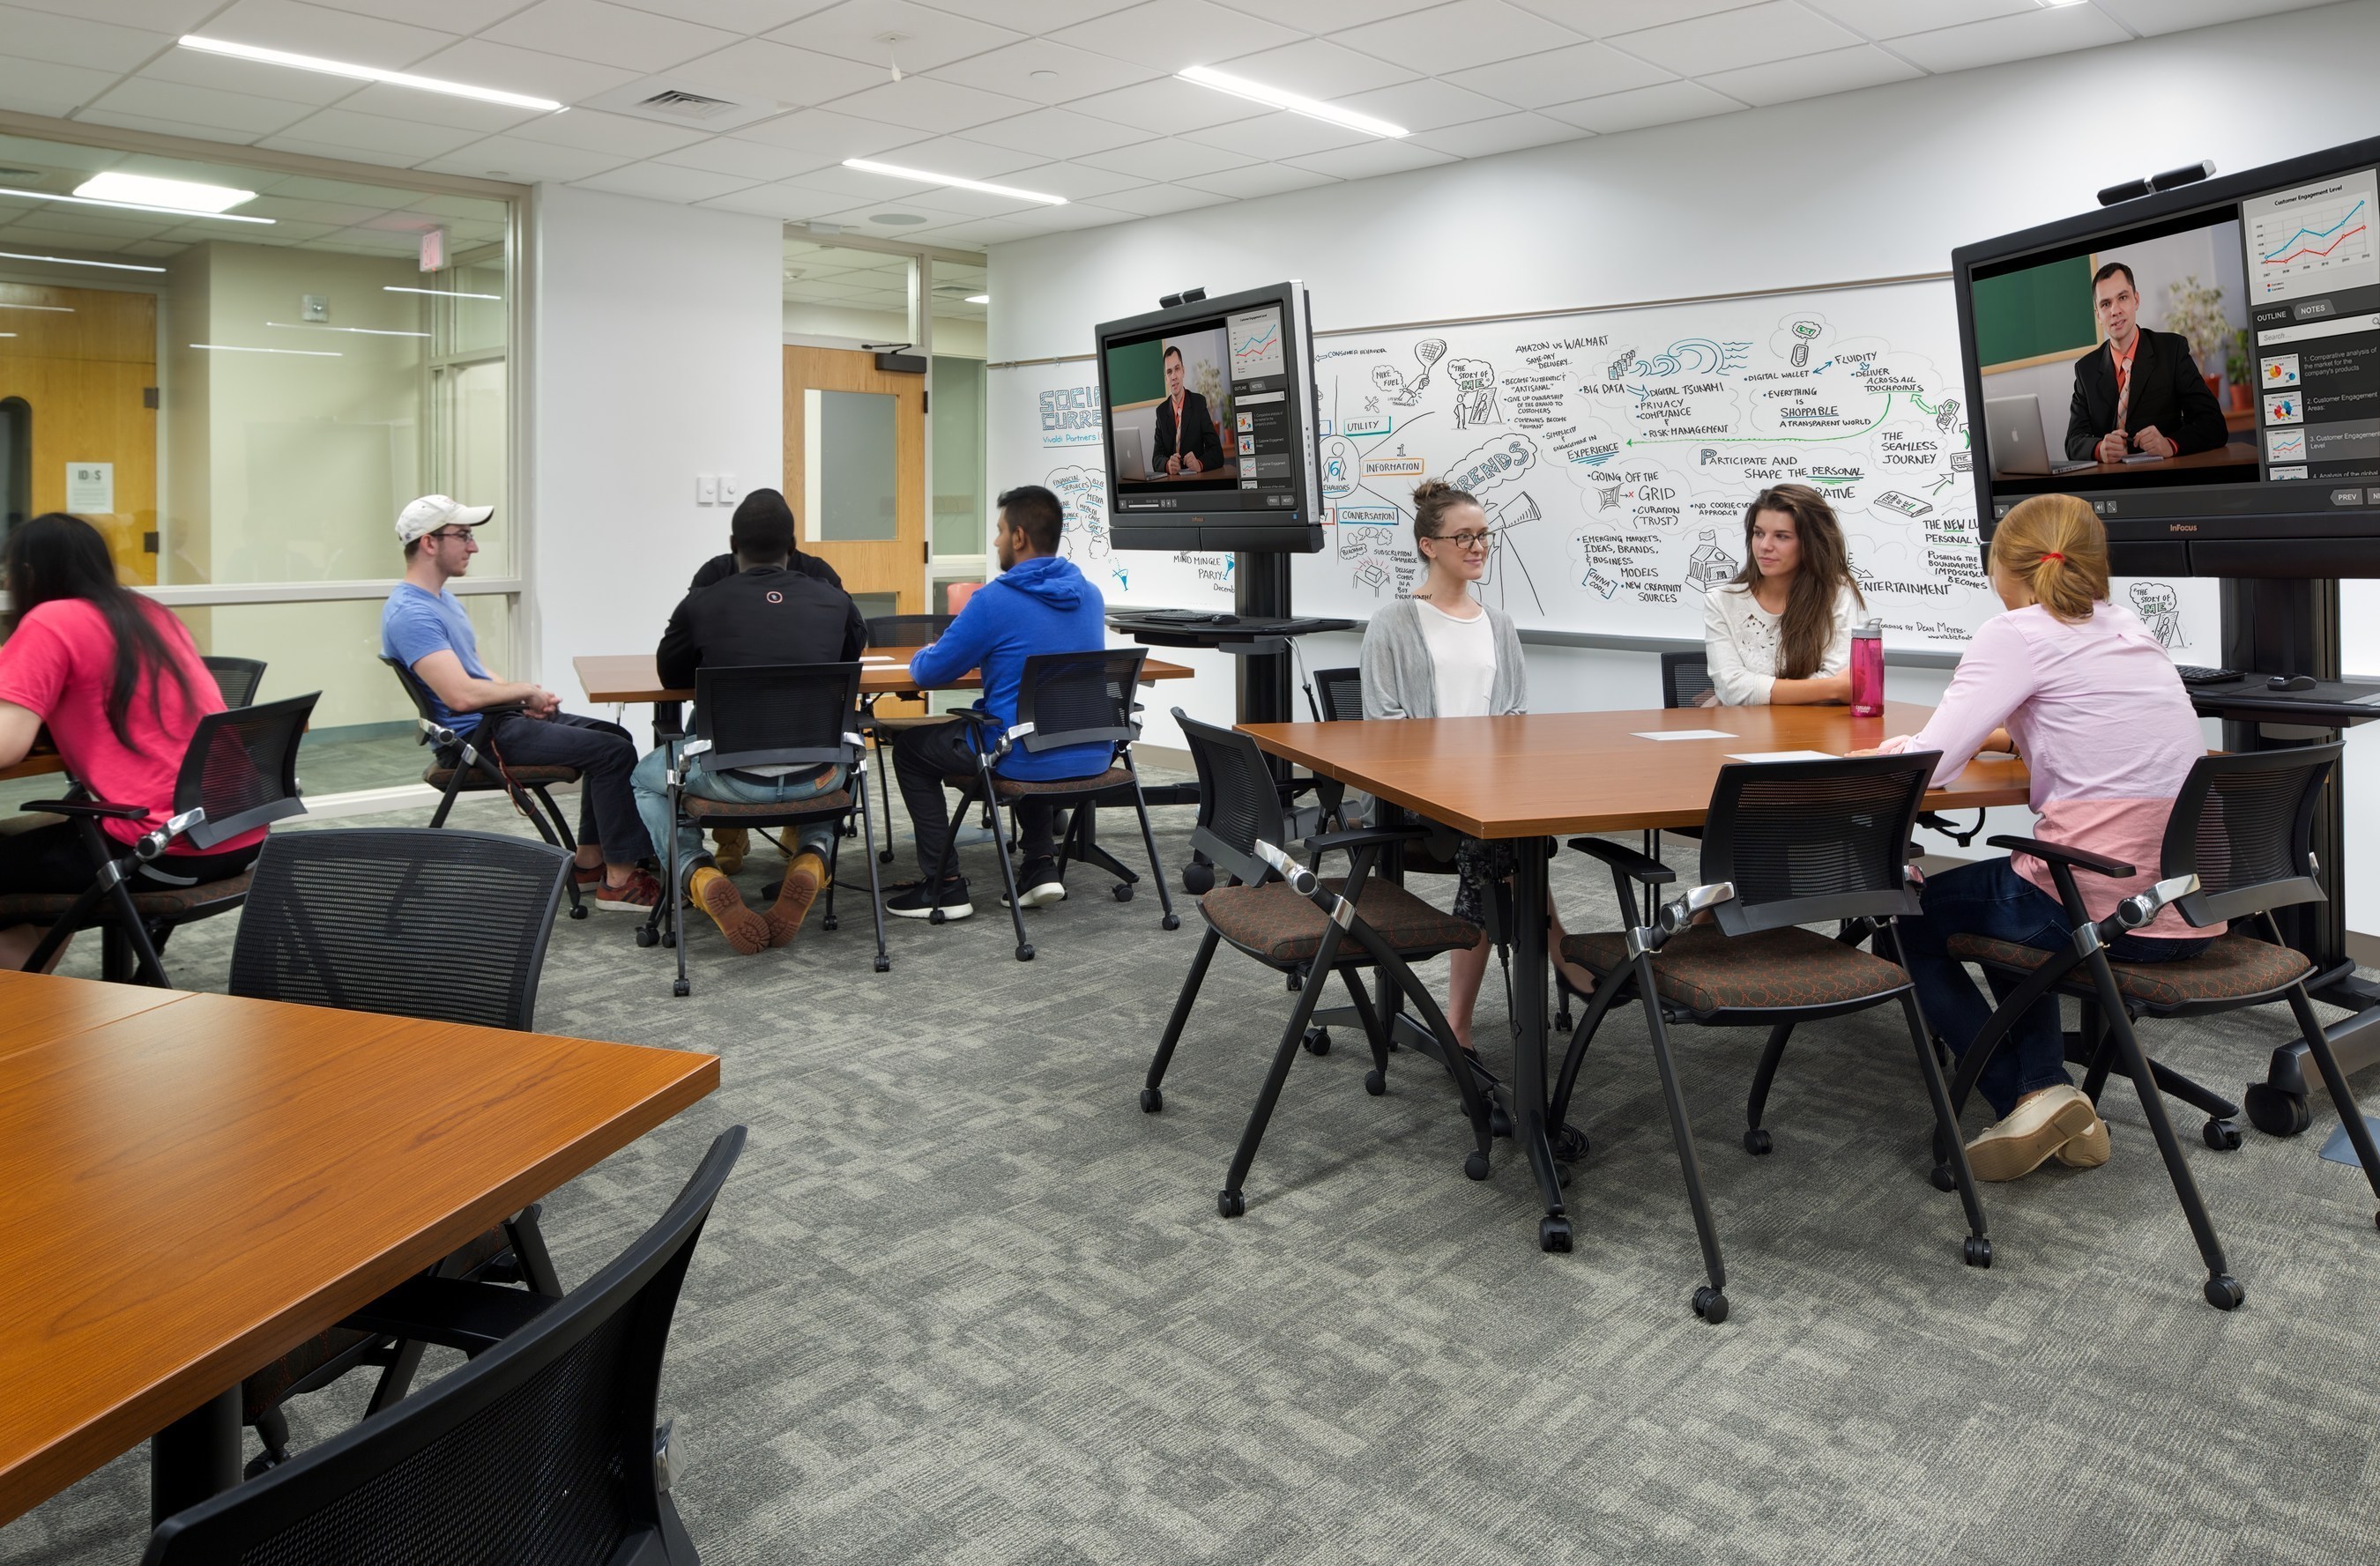 Flexible furniture layouts and movable technology make classrooms adaptable to varied teaching styles and curricula. (Photo Credit: Ed Wonsek)